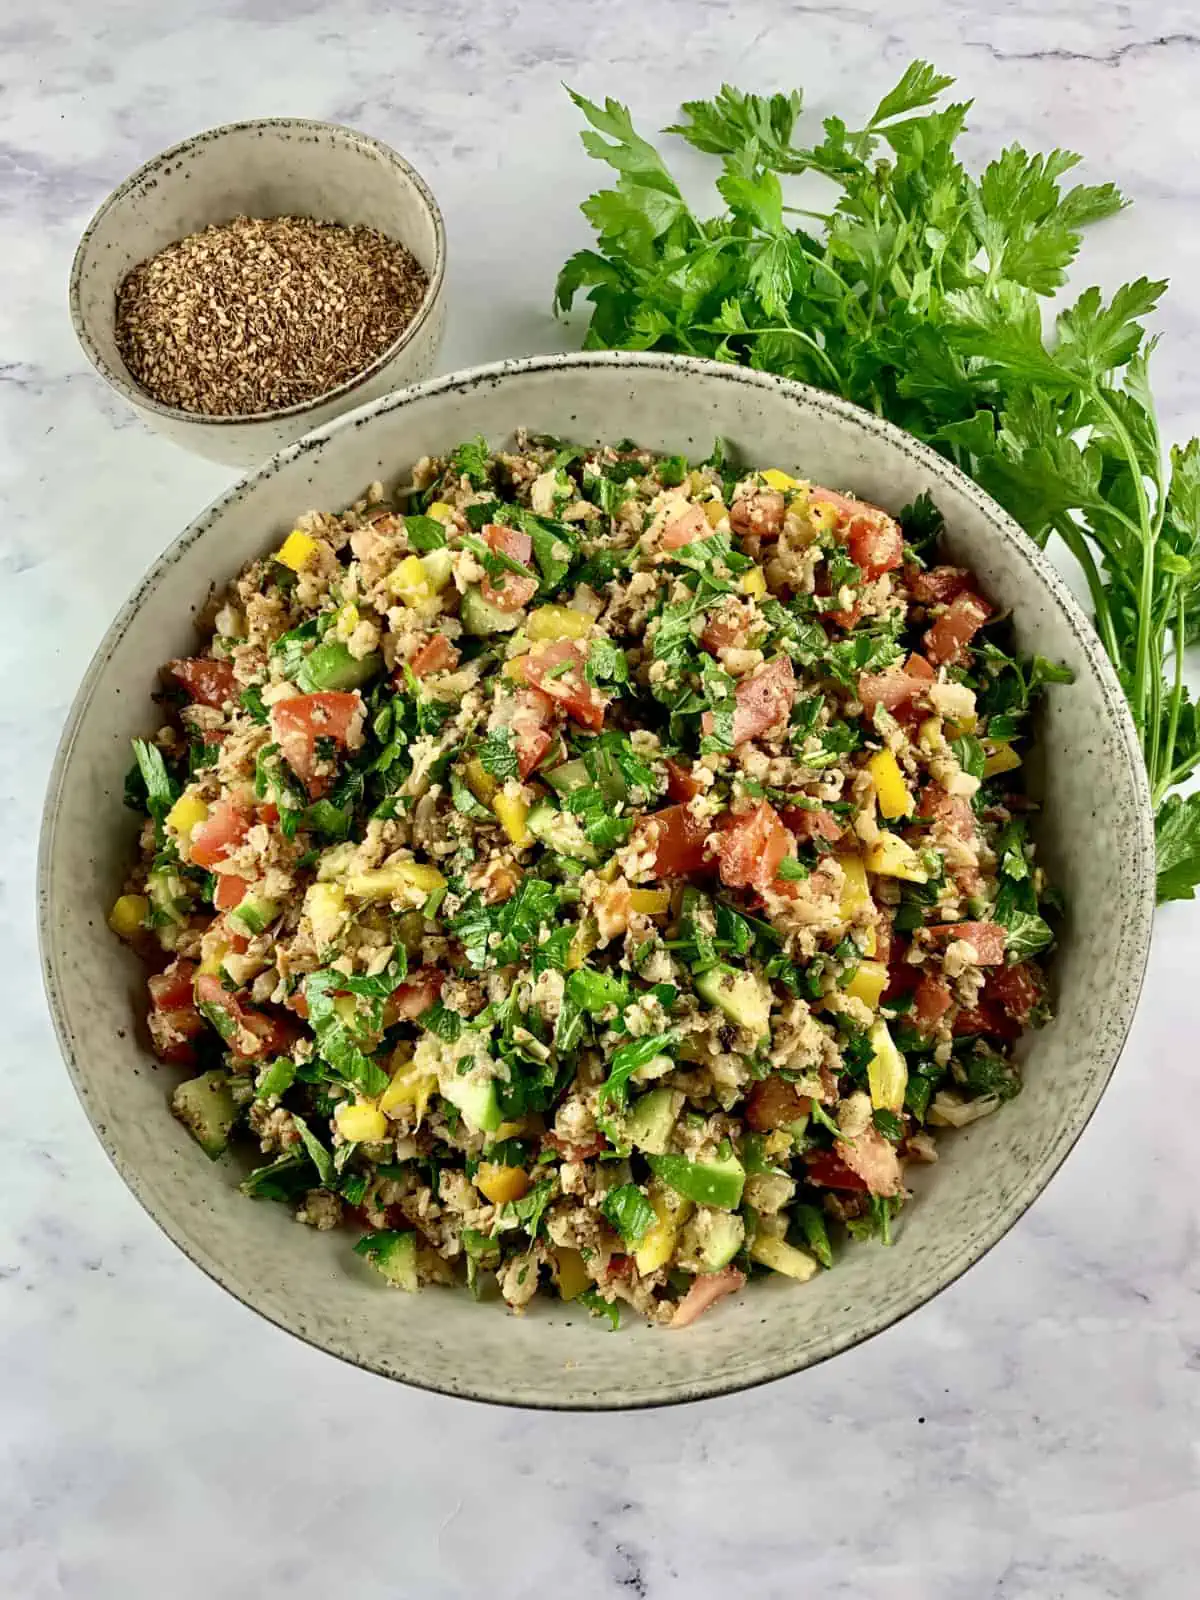 Cauliflower tabbouleh in a bowl with za'atar and parsley on the side.